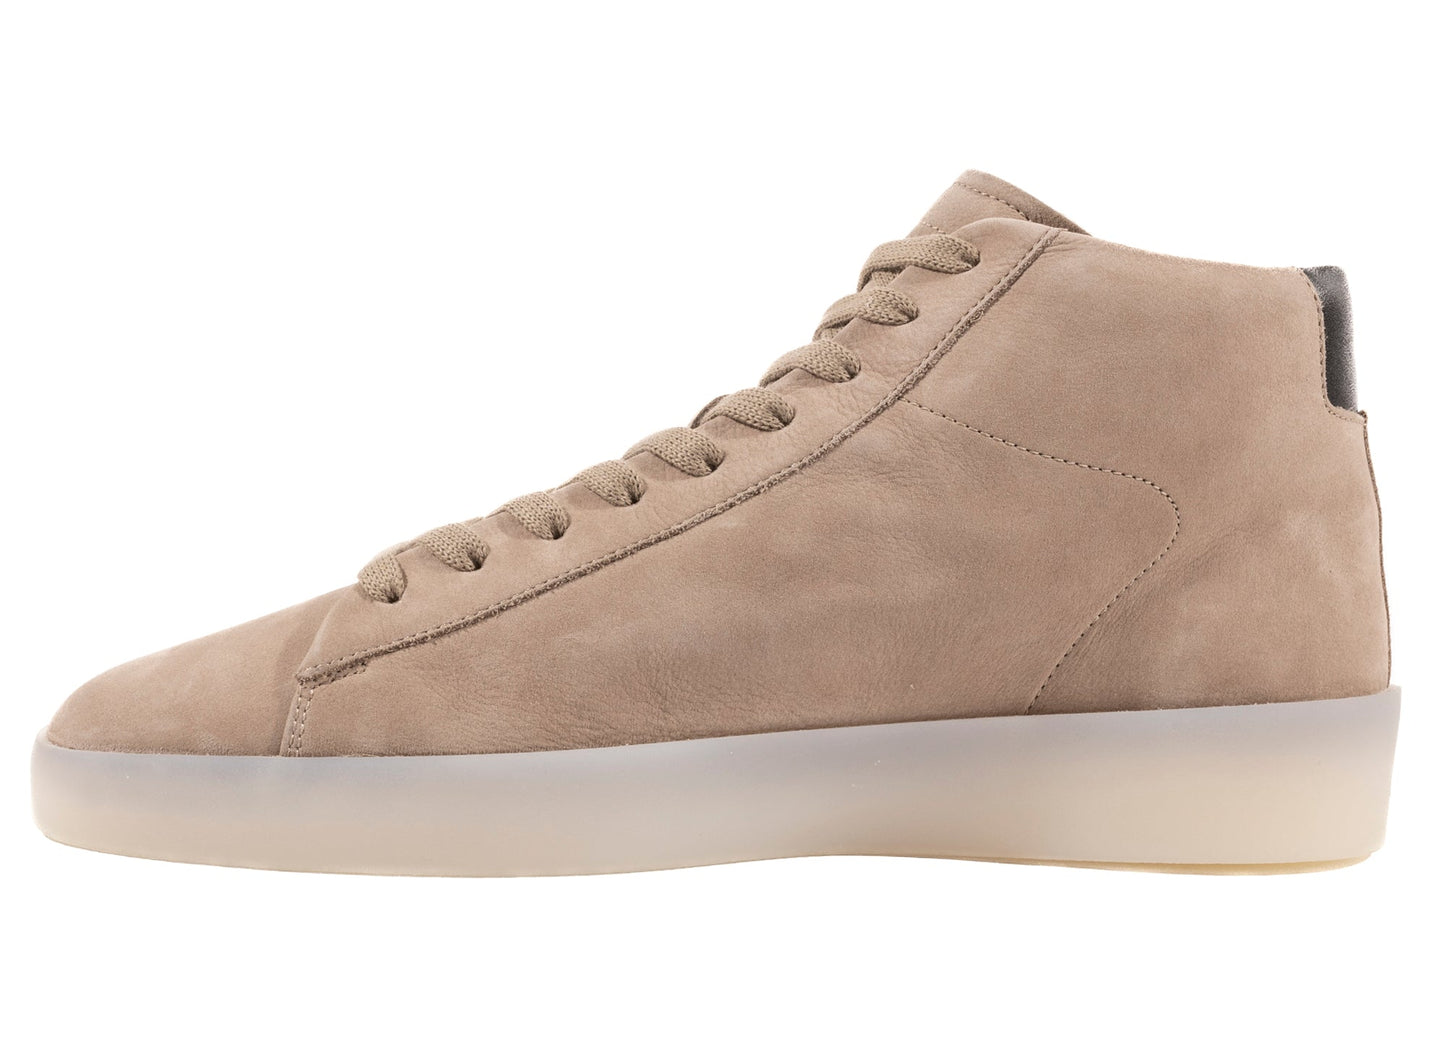 Fear of God Tennis Mid 'Warm Taupe'